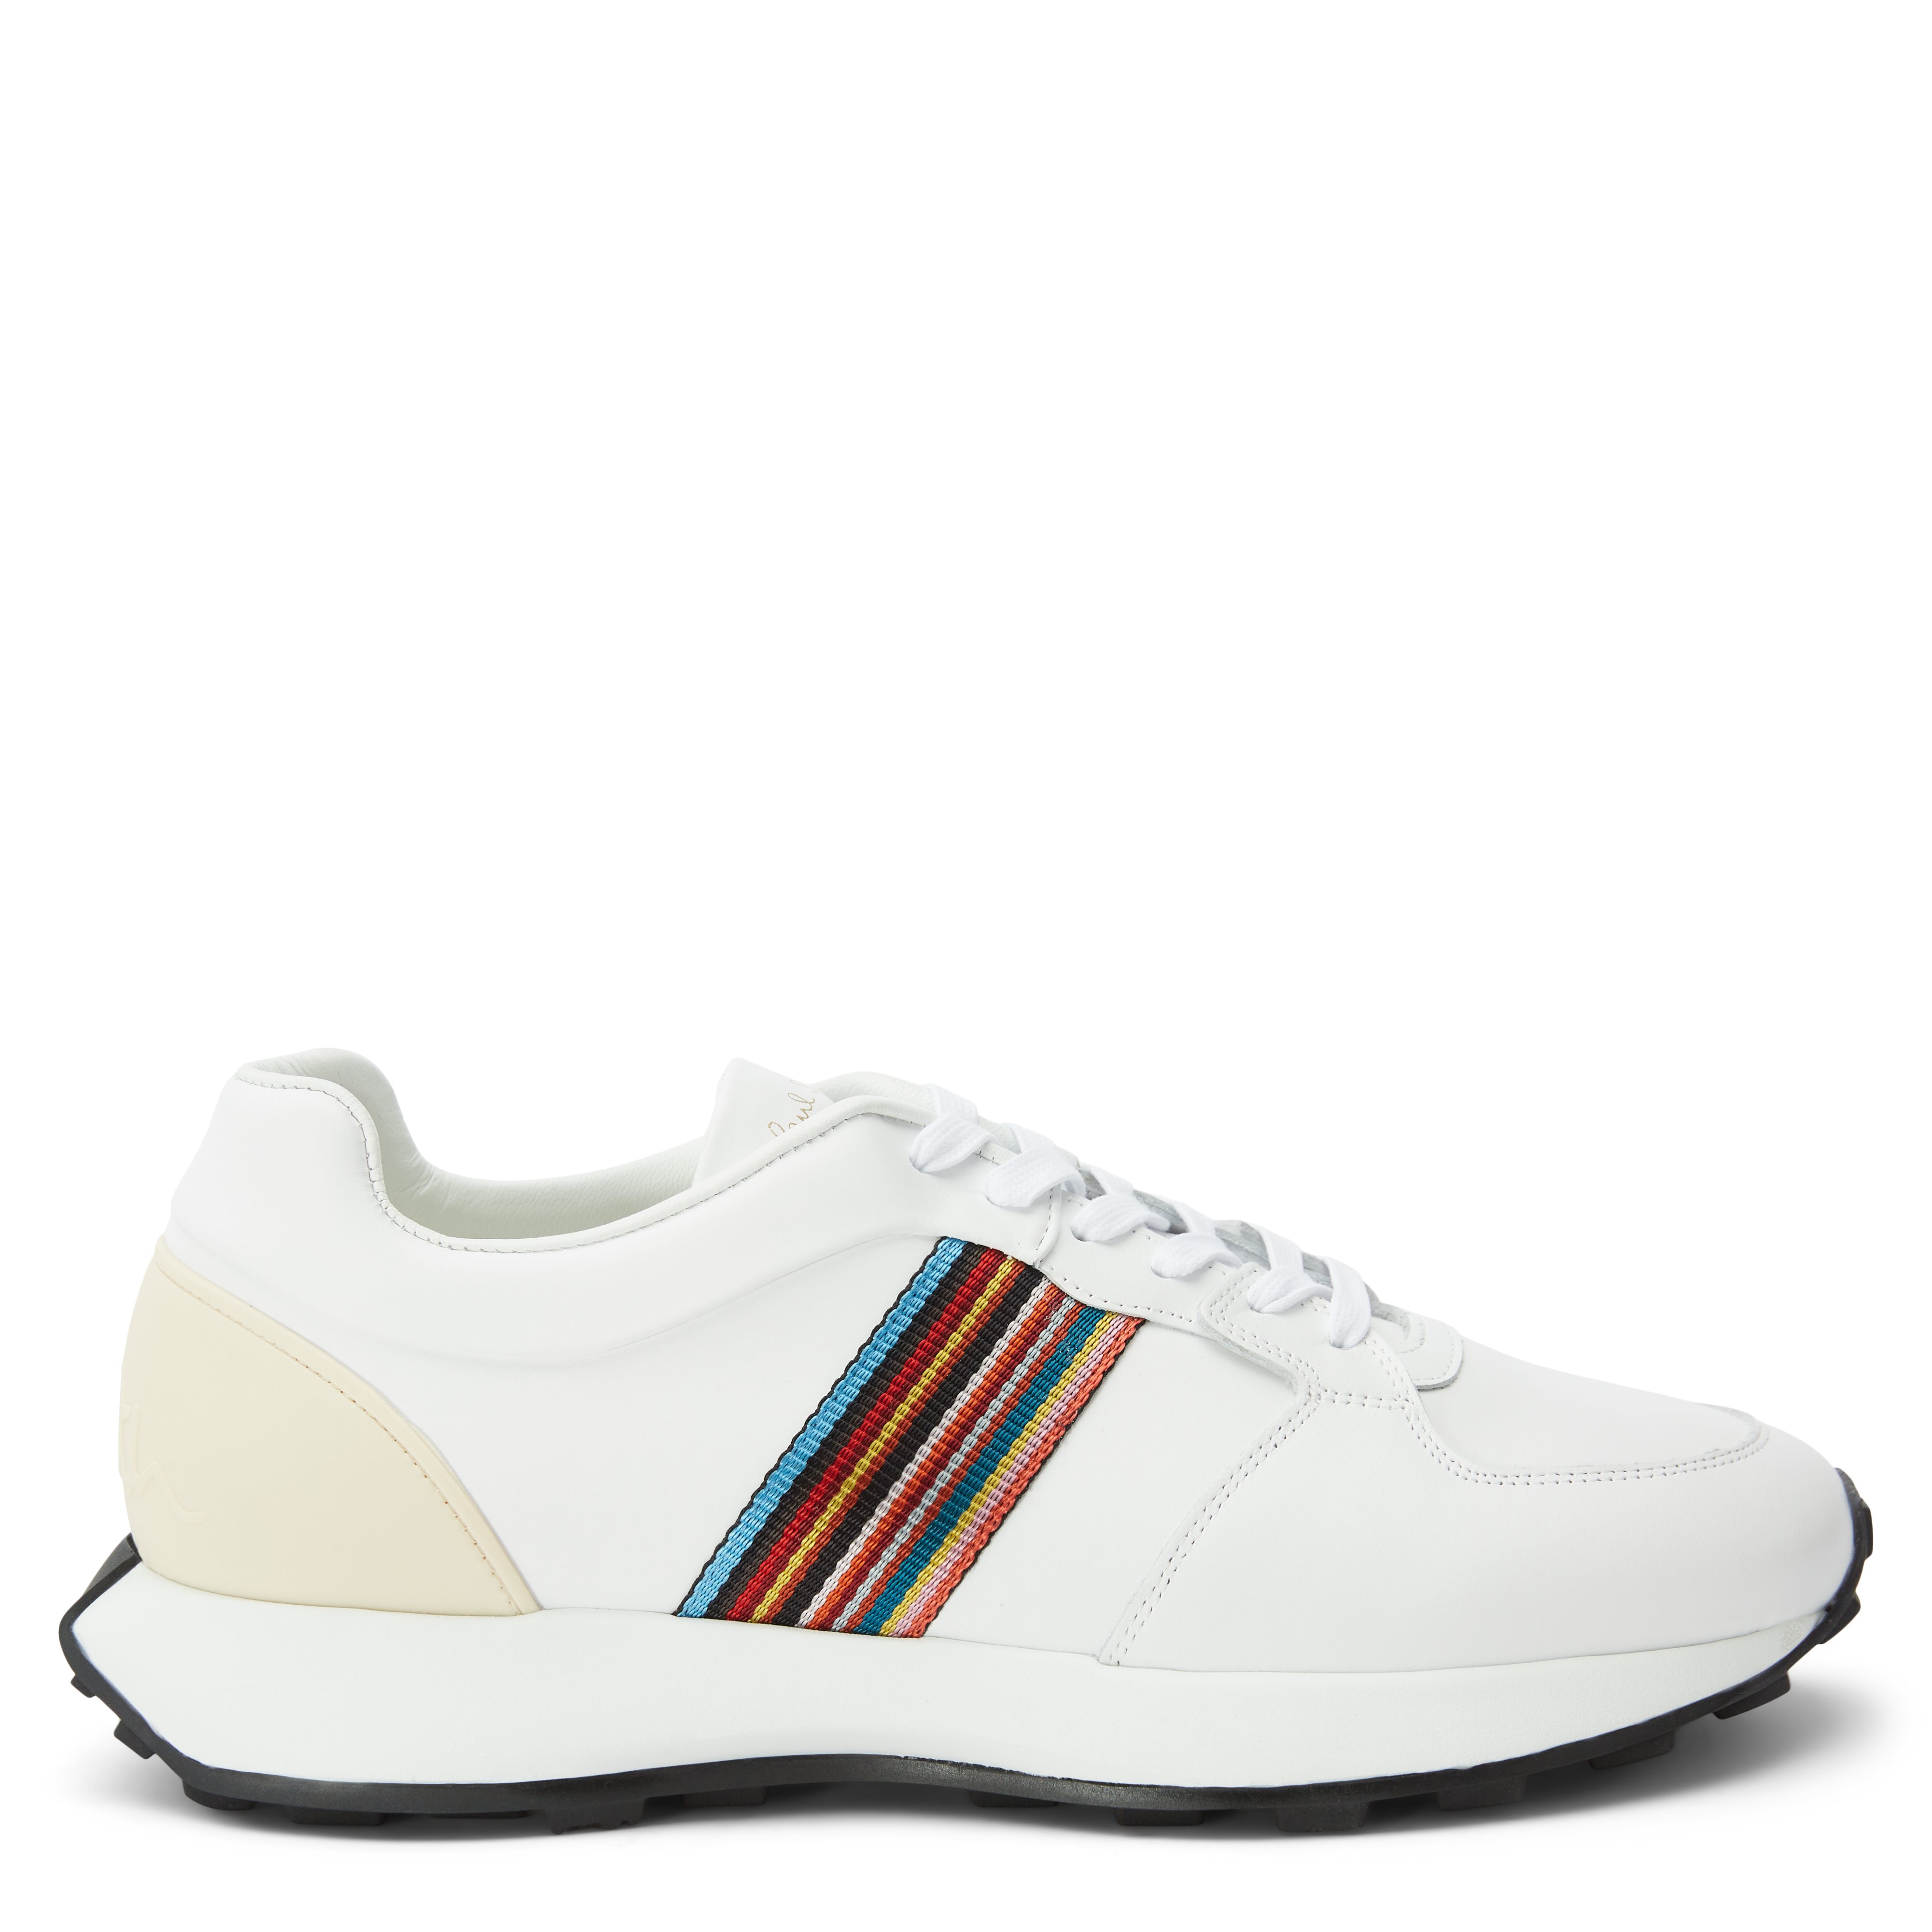 Paul Smith Shoes Shoes EFV01 LMOLV EIGHTY FIVE  White